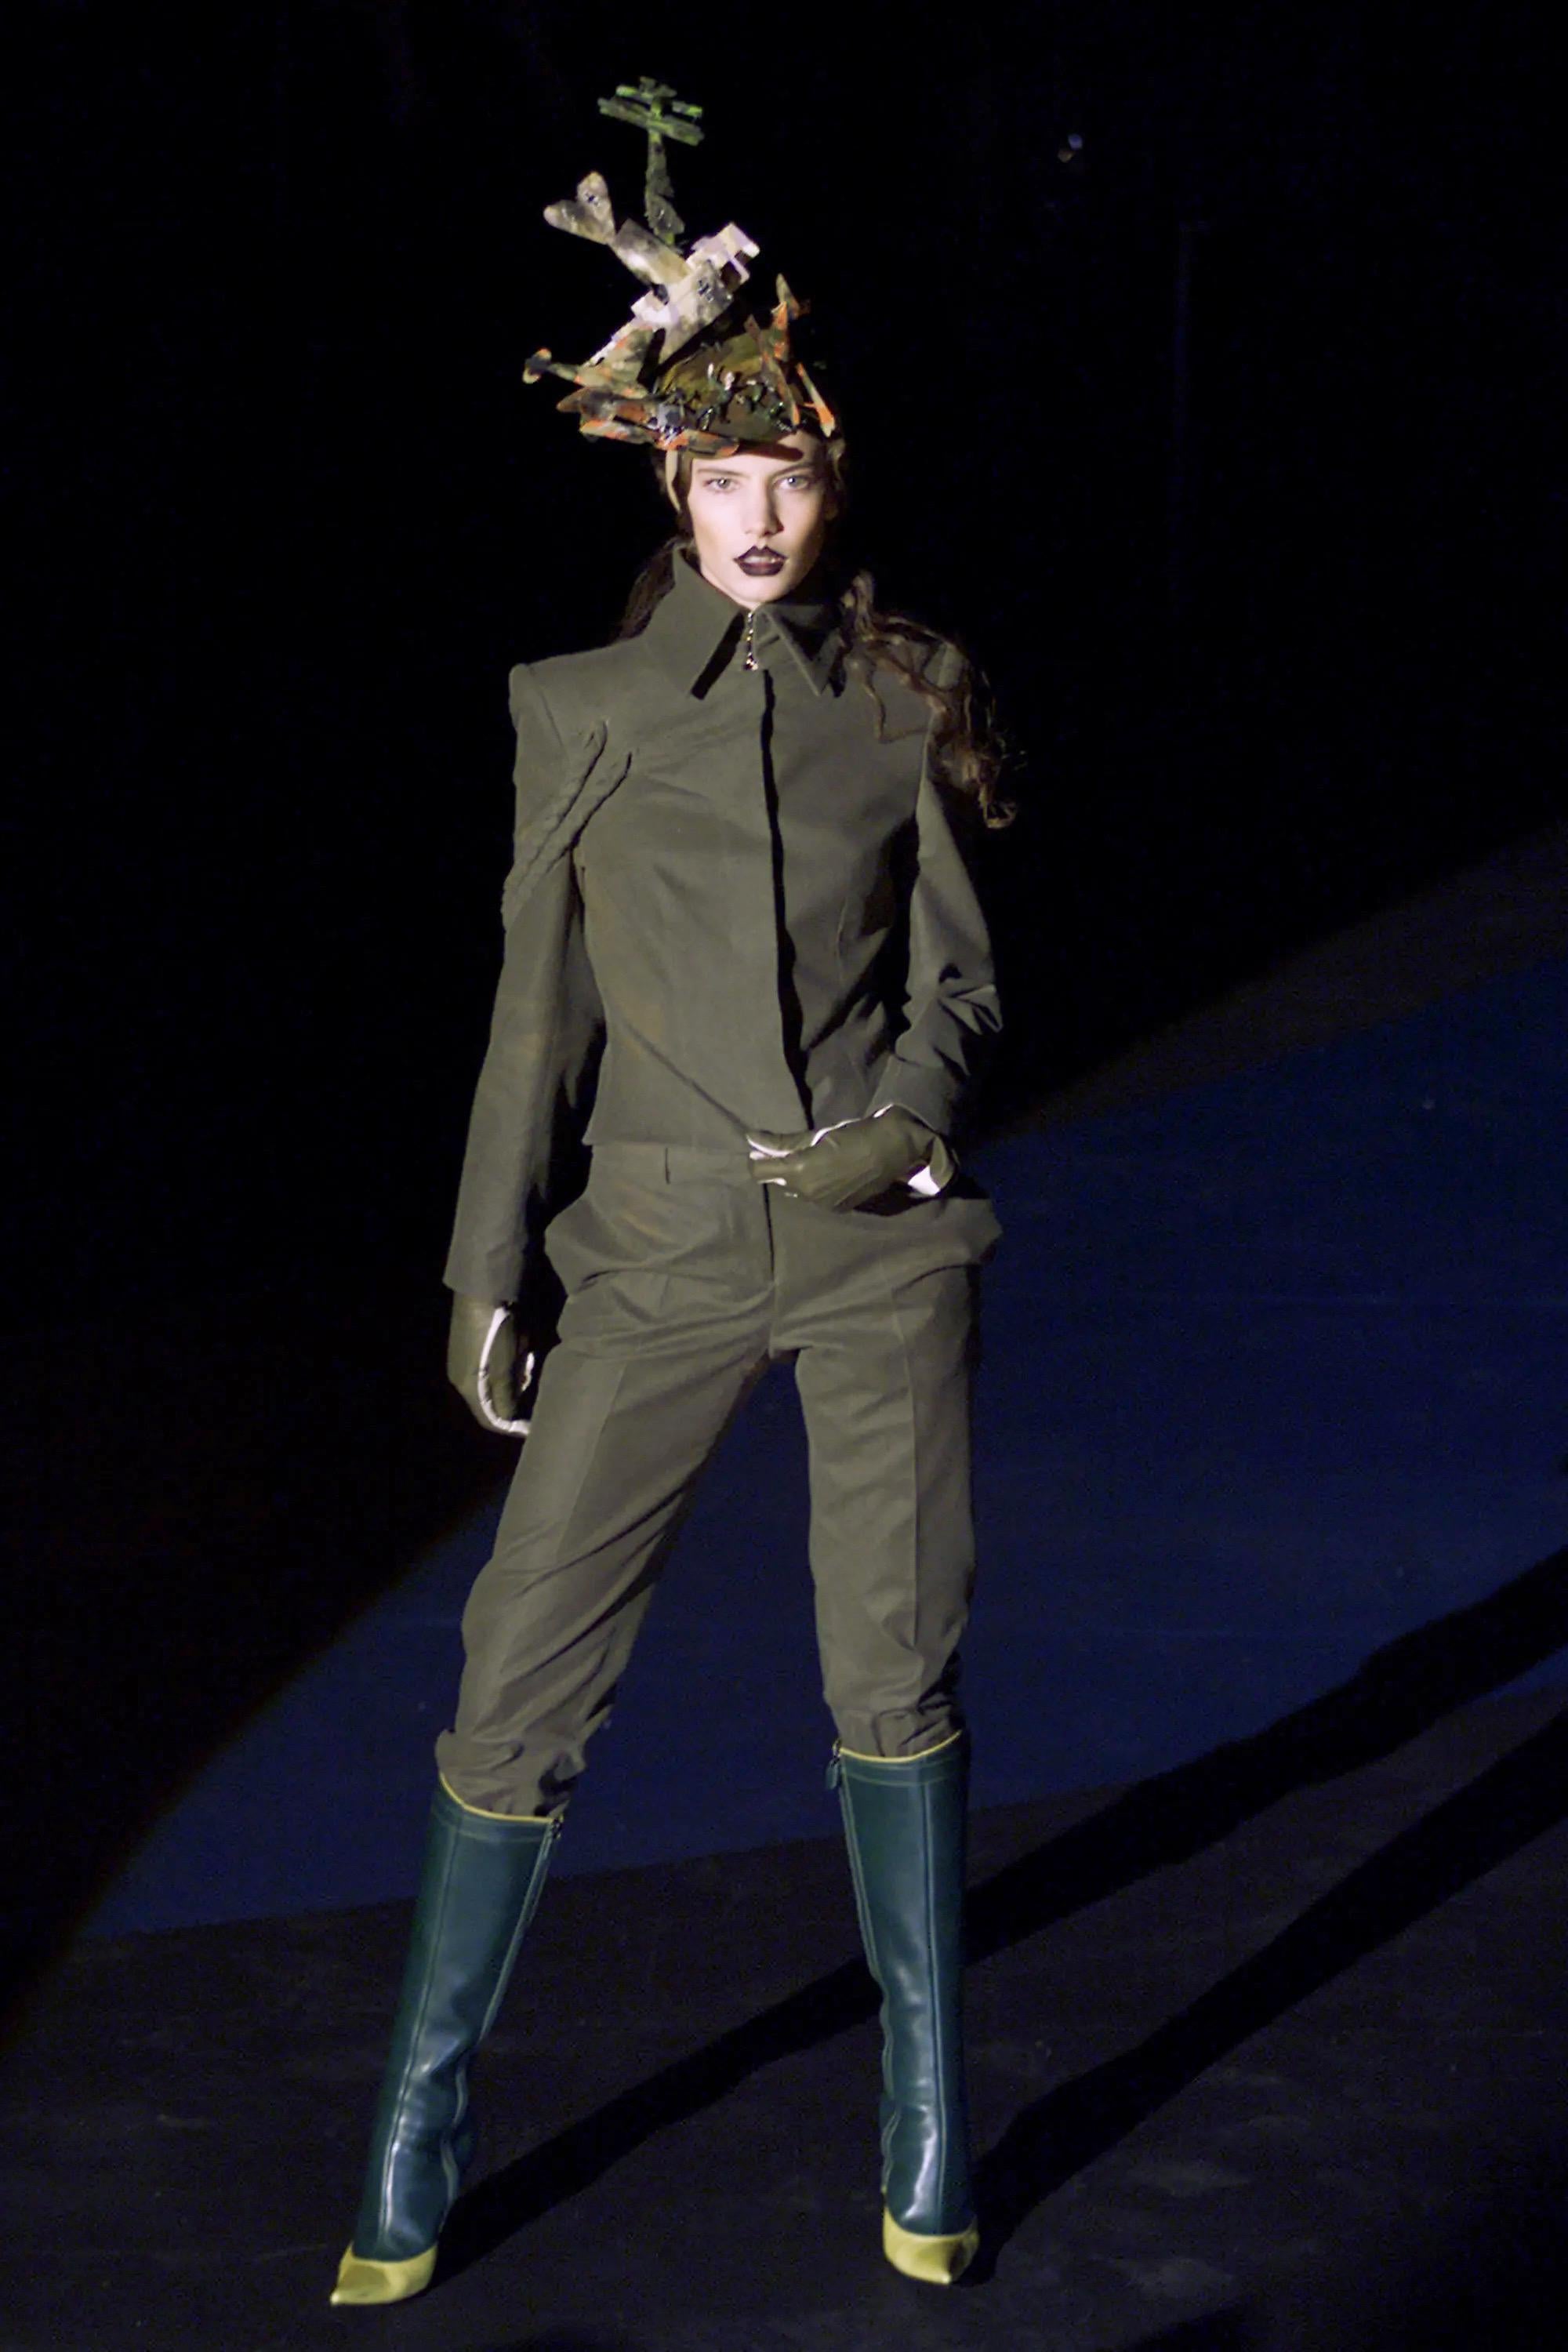 An incredibly chic and highly coveted Alexander McQueen moss green wool braided-jacket pantsuit dating back to his incredible 2001 fall/winter documented collection. This highly stylized yet effortless set, look #2 on the runway, is a perfect